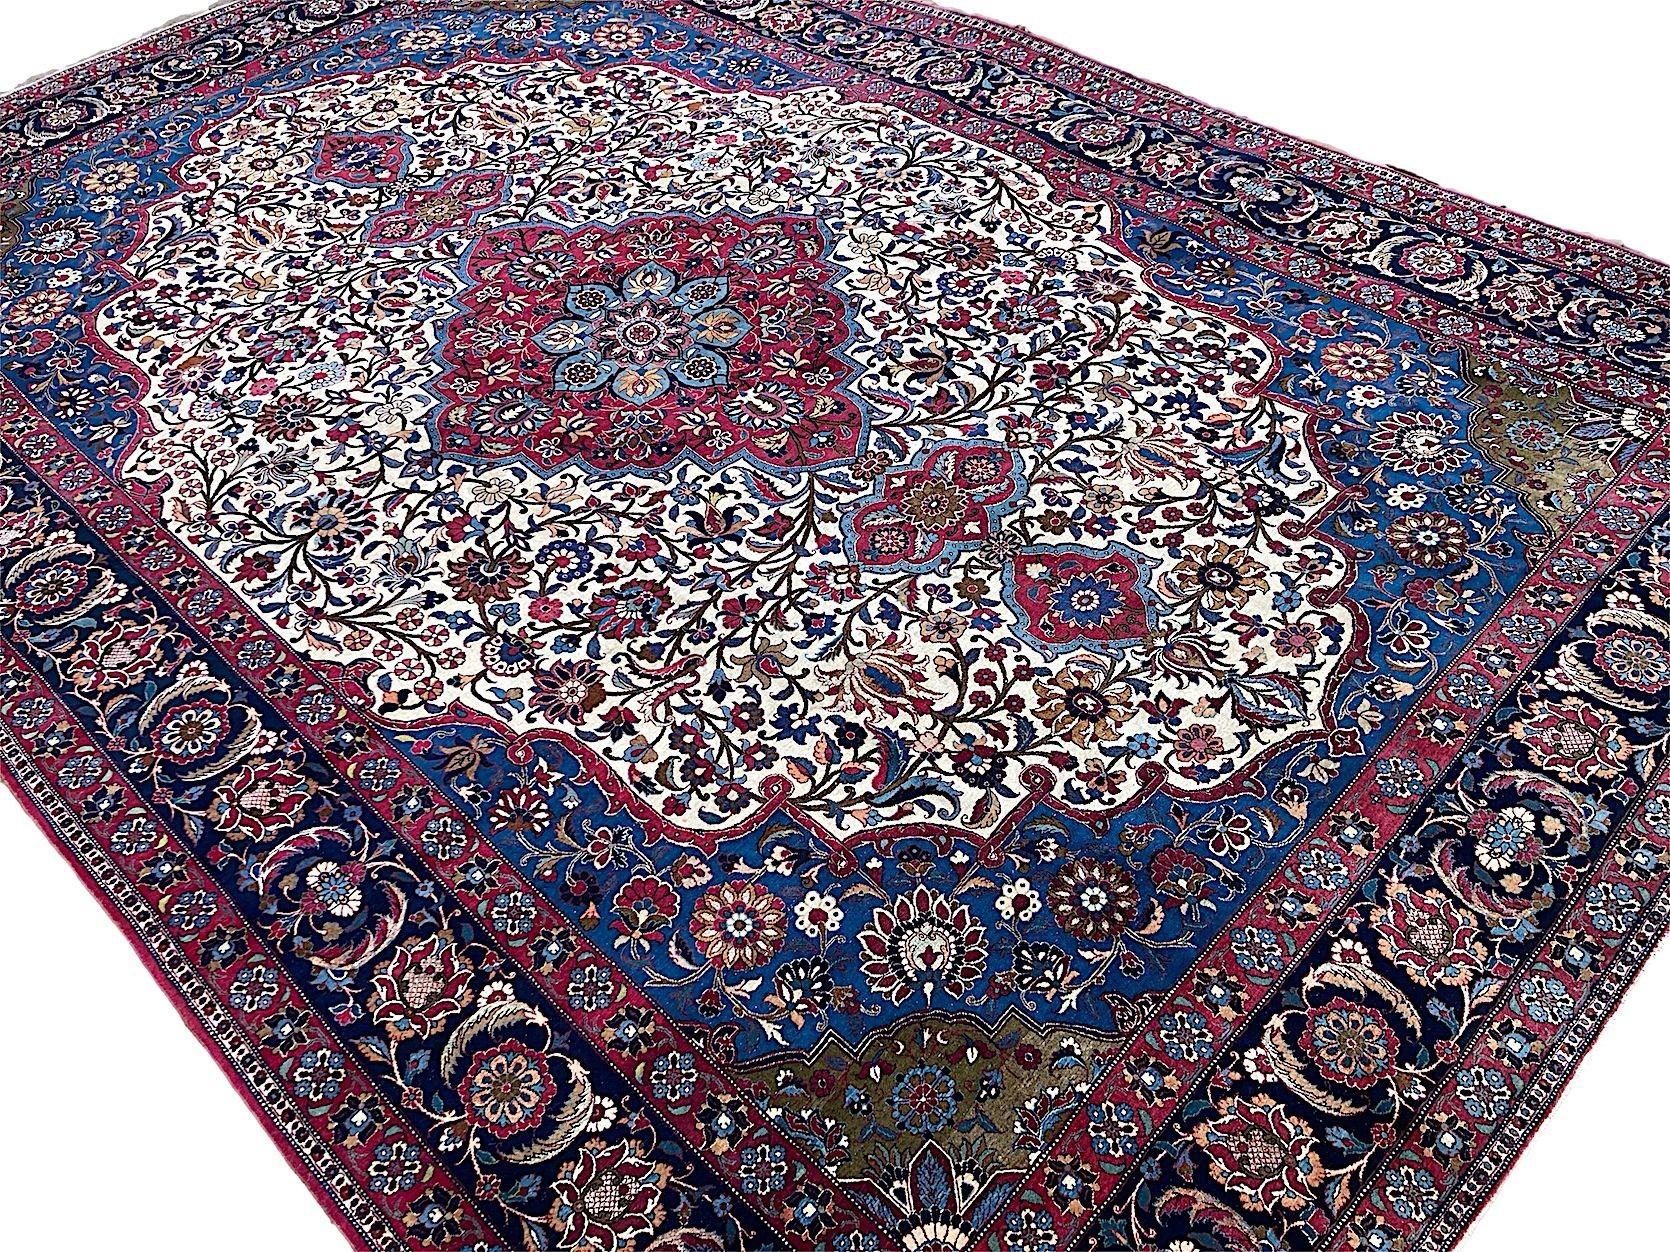 Early 20th Century Antique Wool & Silk Isfahan Carpet 3.43m x 2.33m For Sale